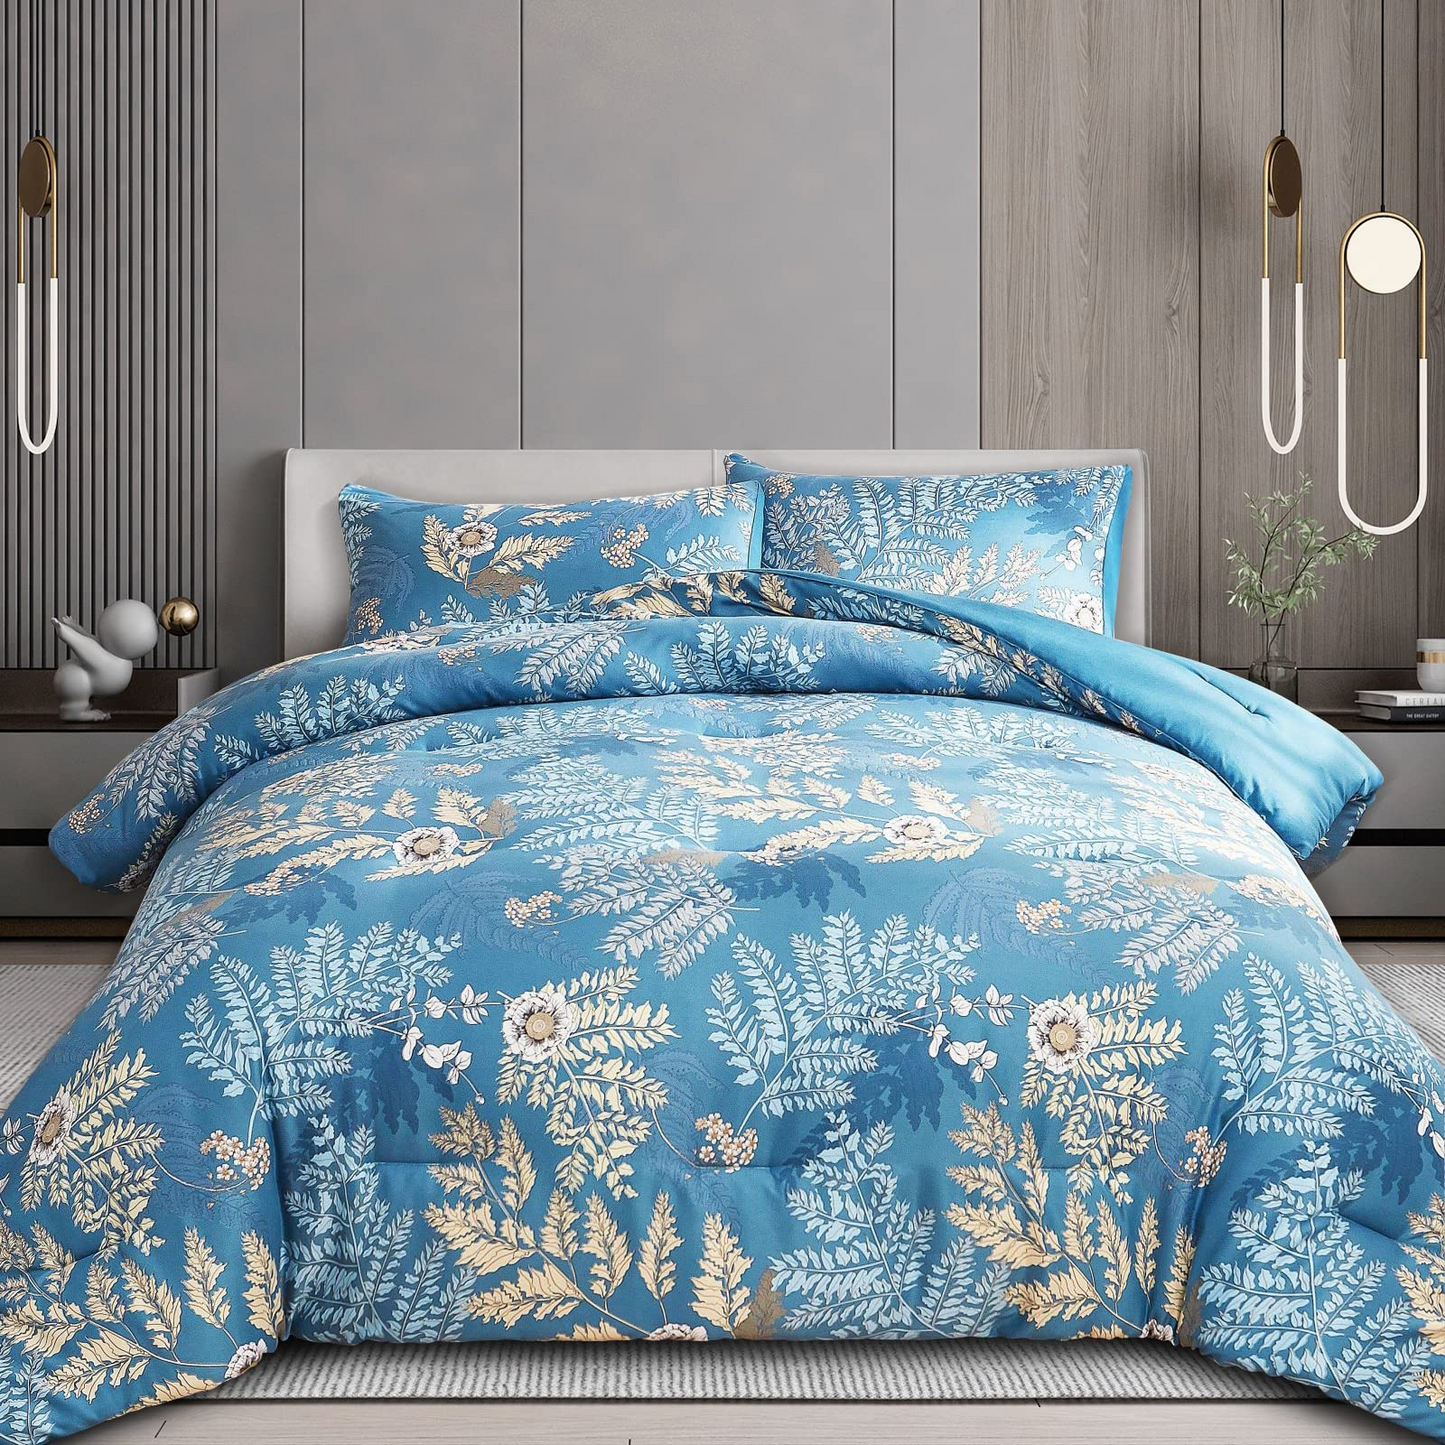 Blue Embroidery Comforter Set With 2 Pillow Cases